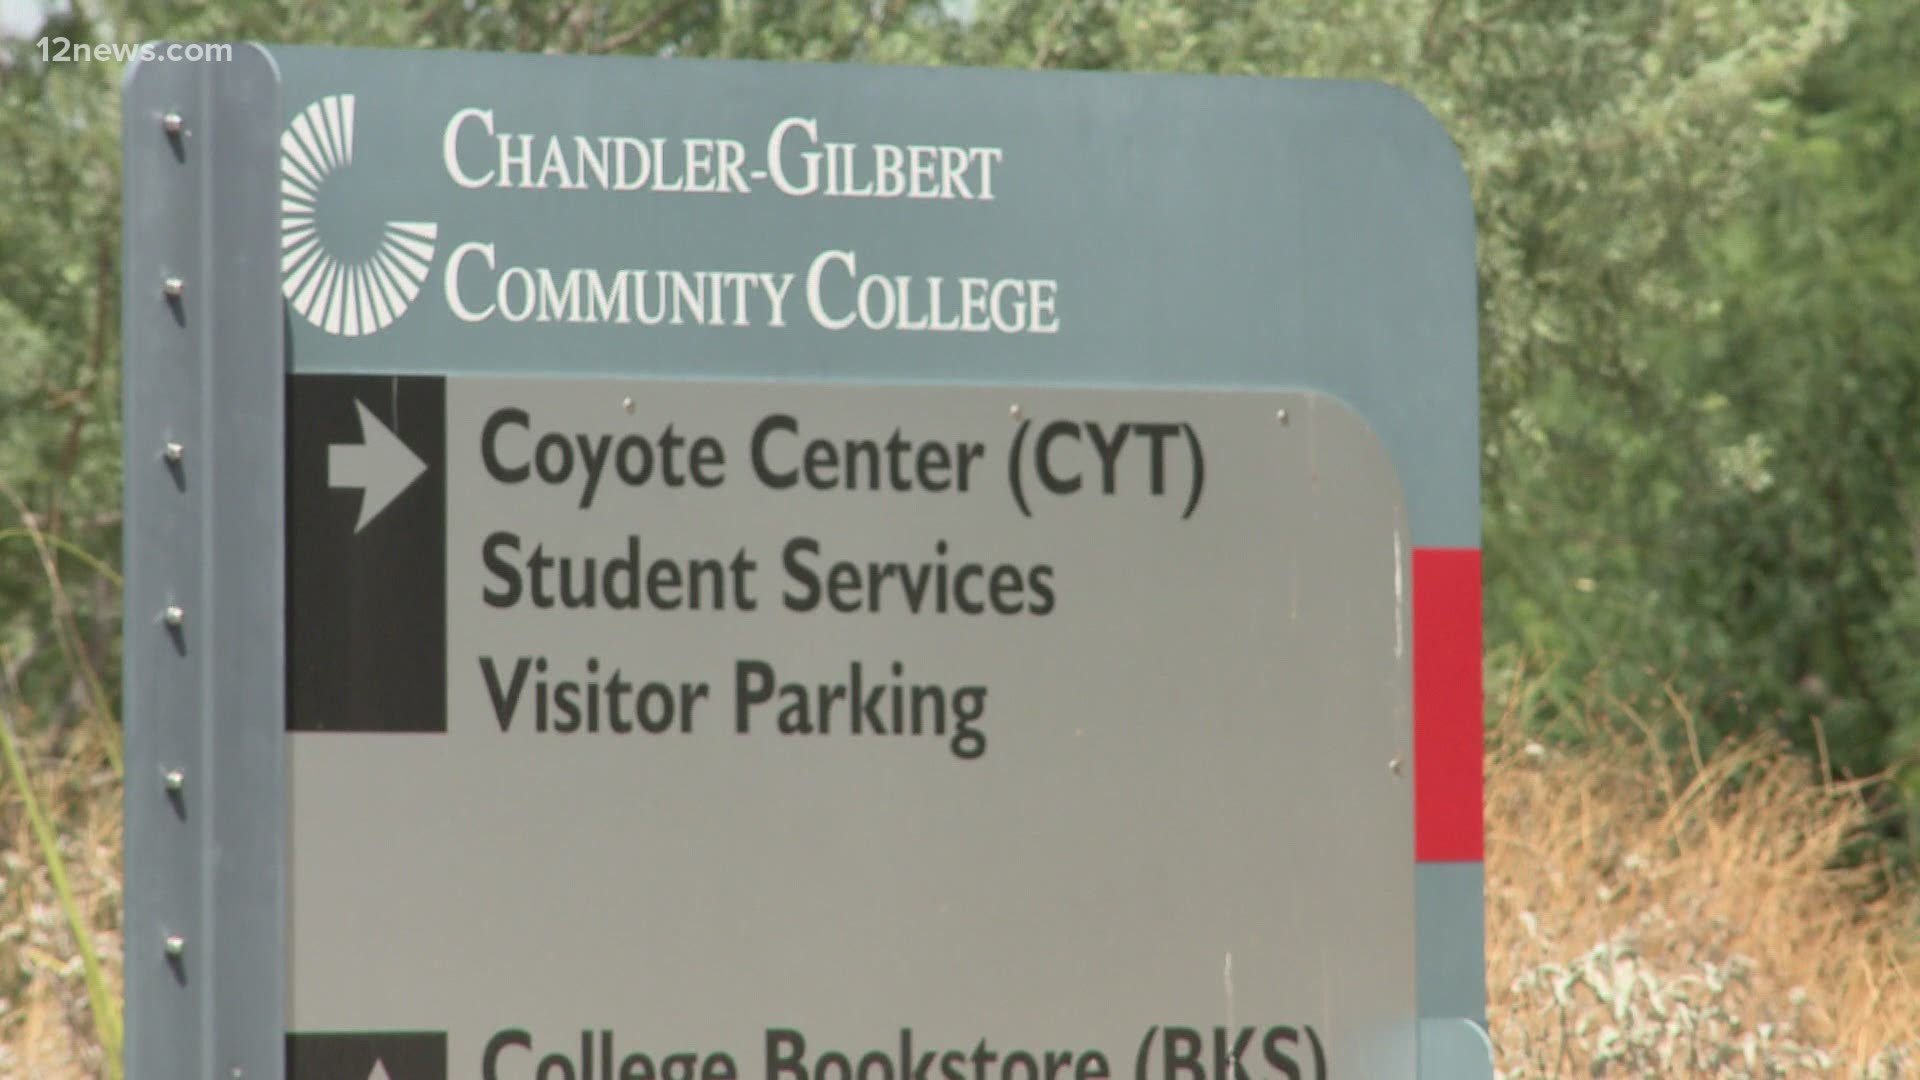 The Chandler-Gilbert Community College in the East Valley will be home to a state-run COVID-19 vaccination site. Team 12's Trisha Hendricks has the latest.